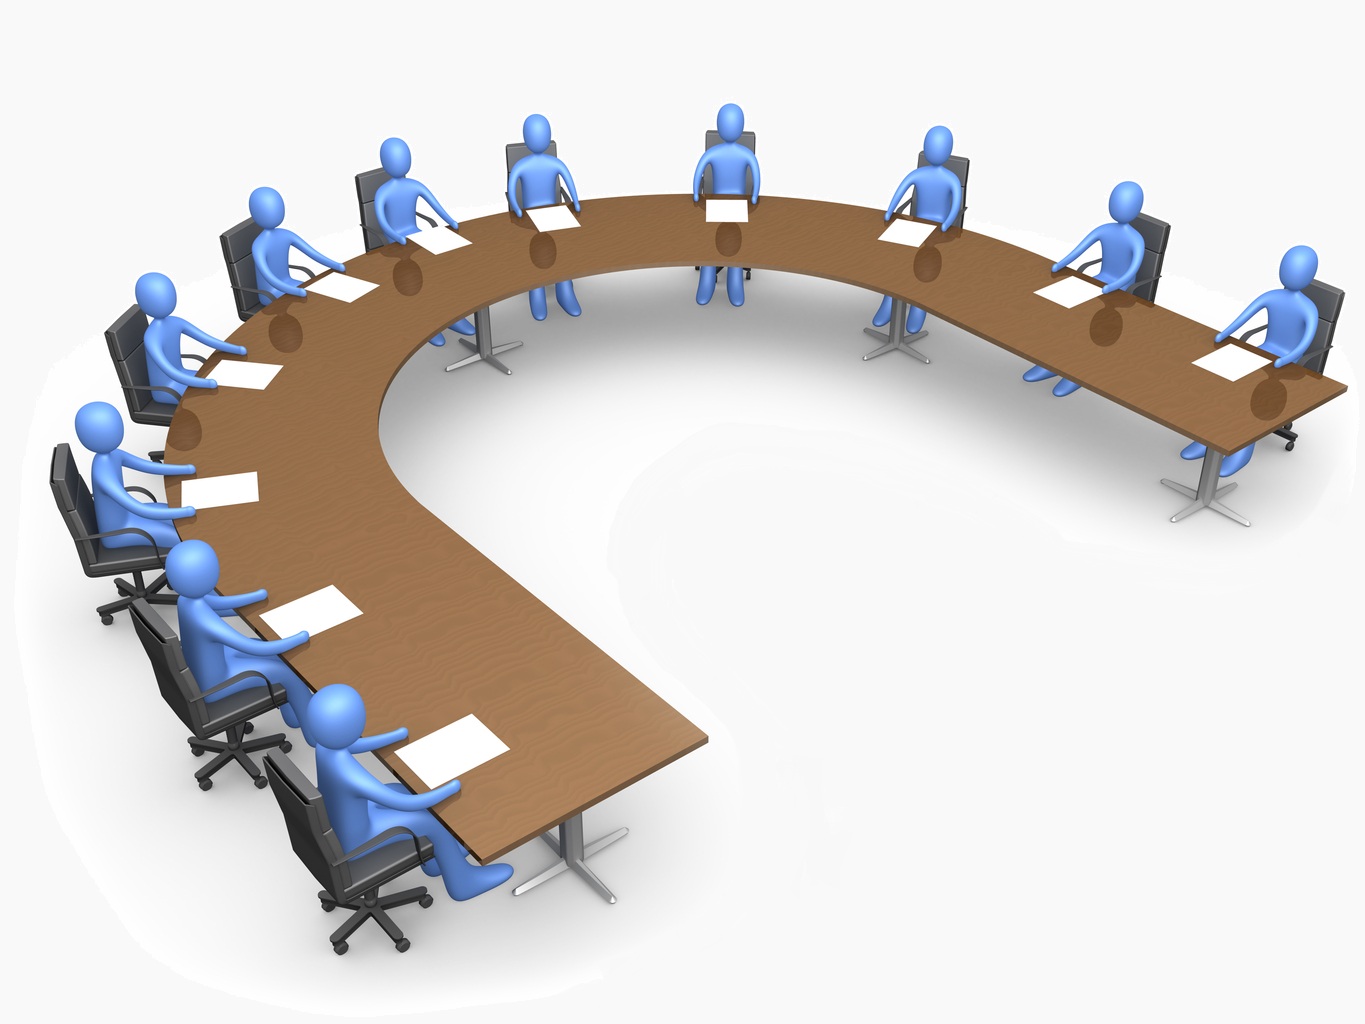 Meeting clip art images free clipart